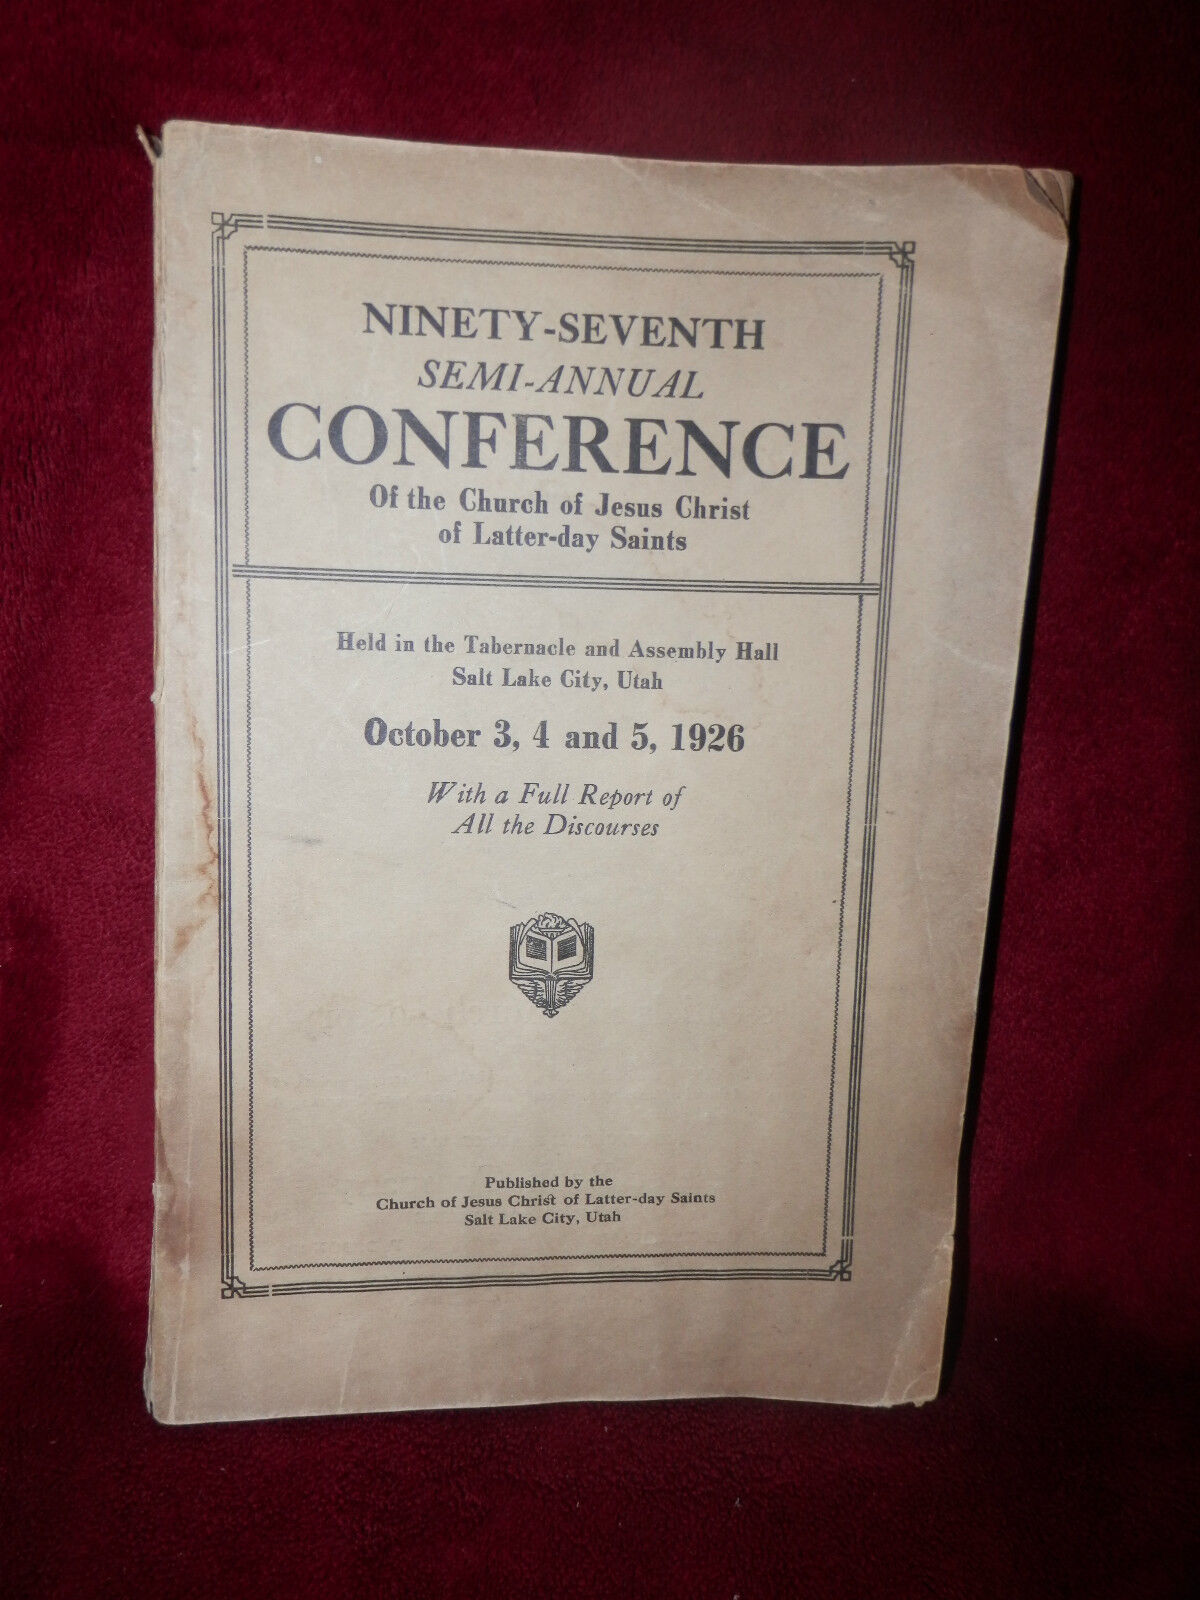 LDS Conference Report of October 1926 Mormon Book   Lot # E4